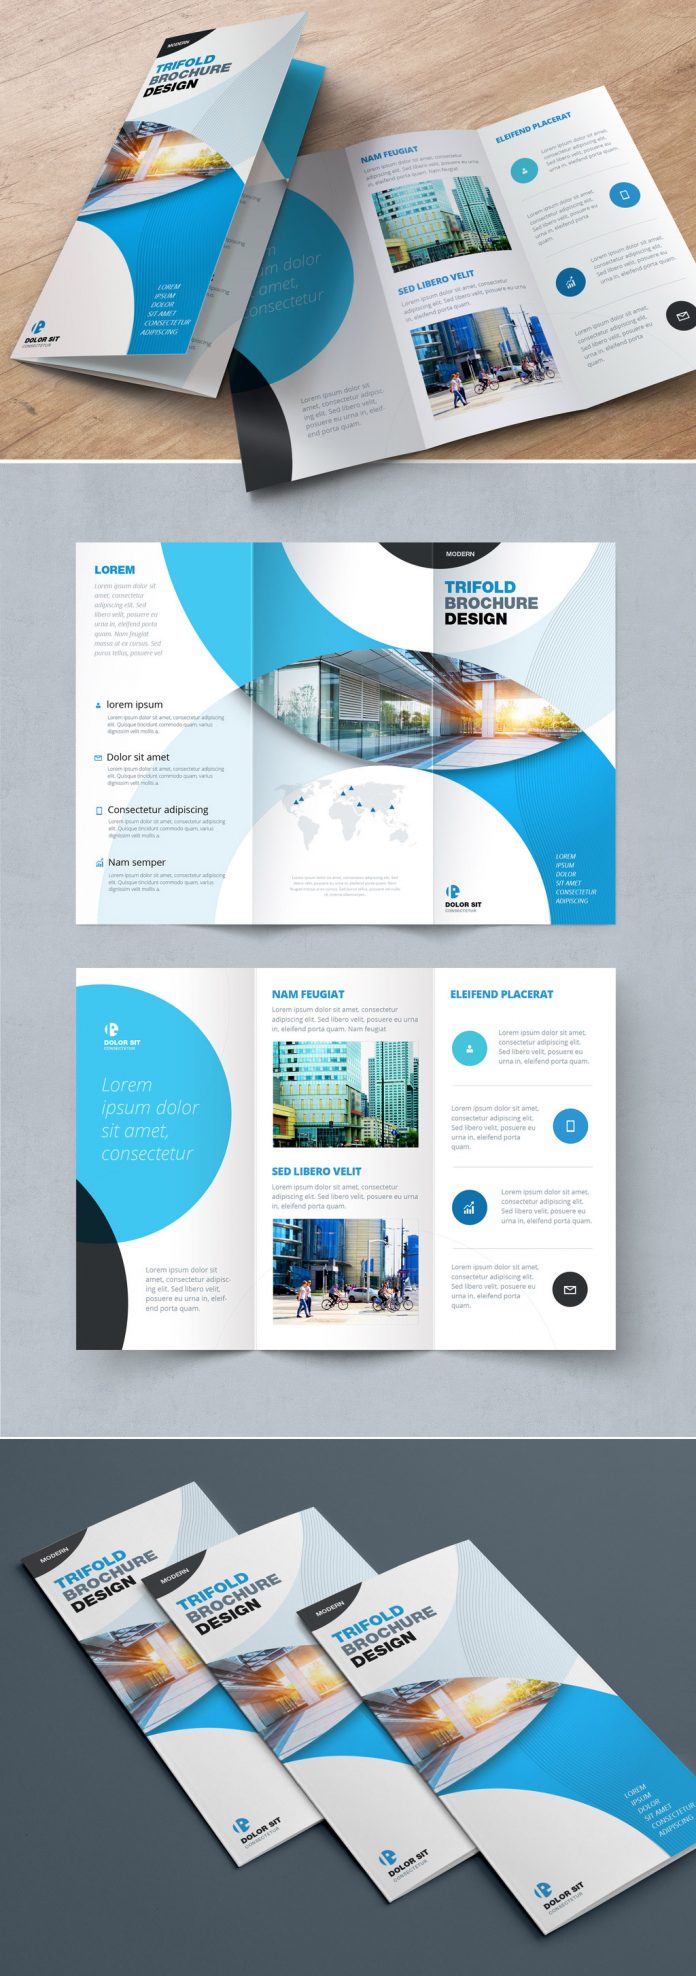 Blue Trifold InDesign Brochure Template with Circles